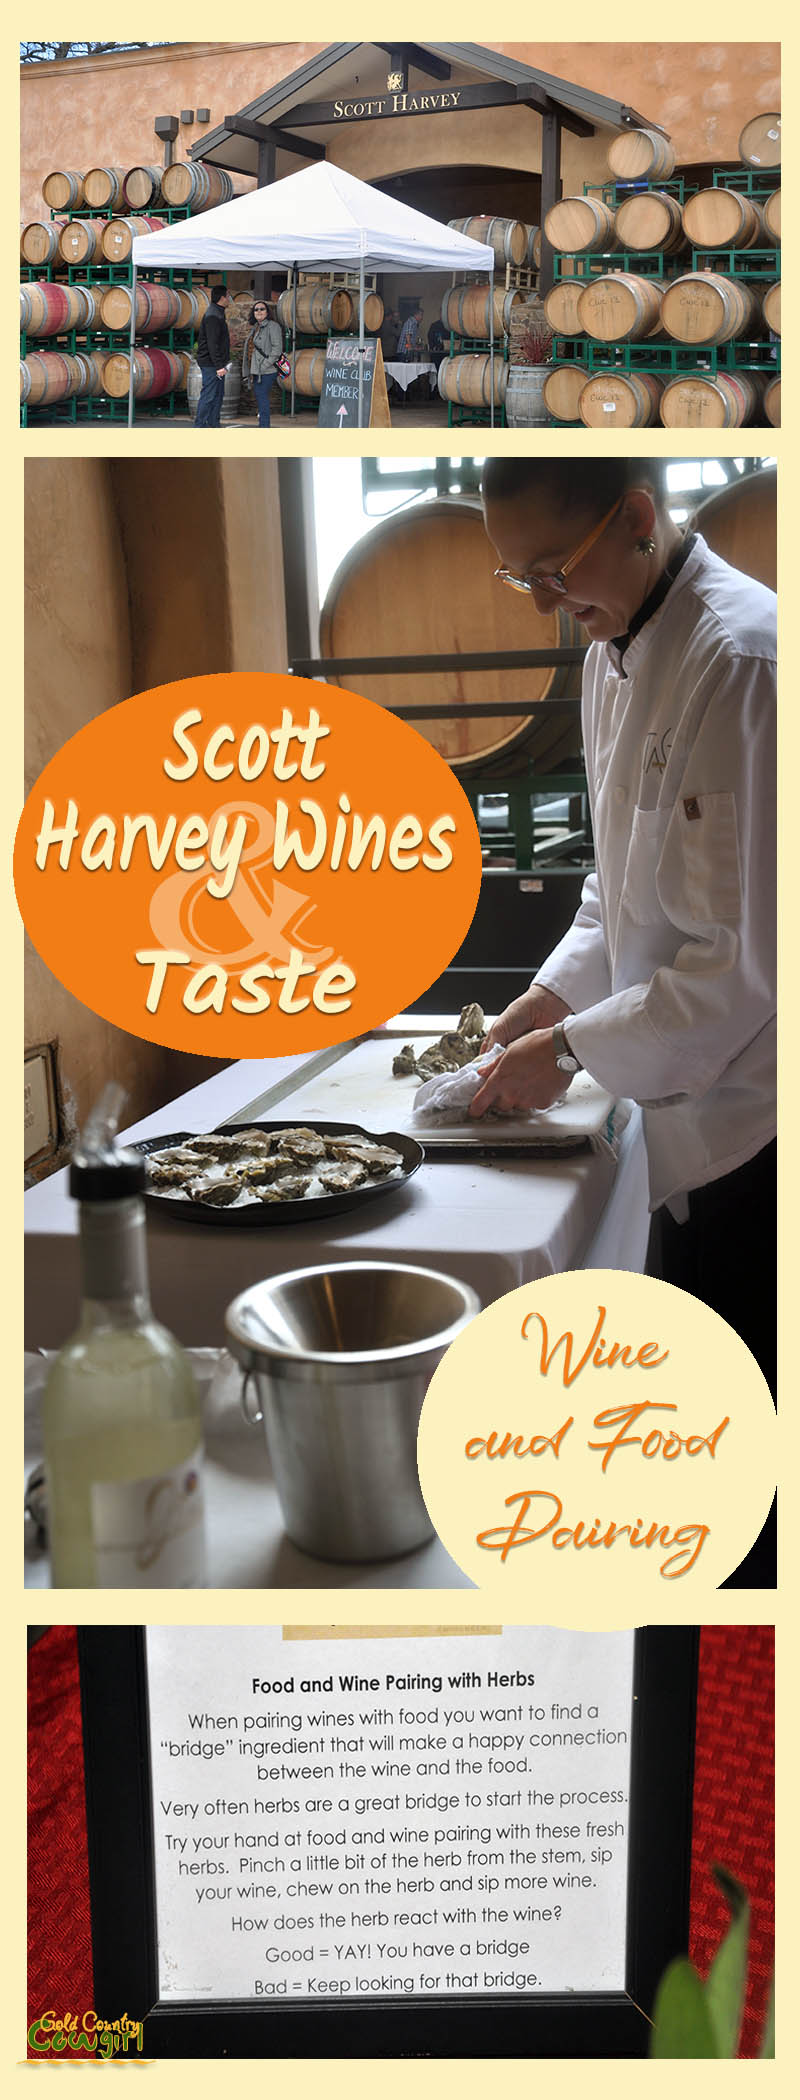 The Scott Harvey Wines and Taste Restaurant wine and food pairing for wine club members and guests was a hit. Wine club membership has its privileges!